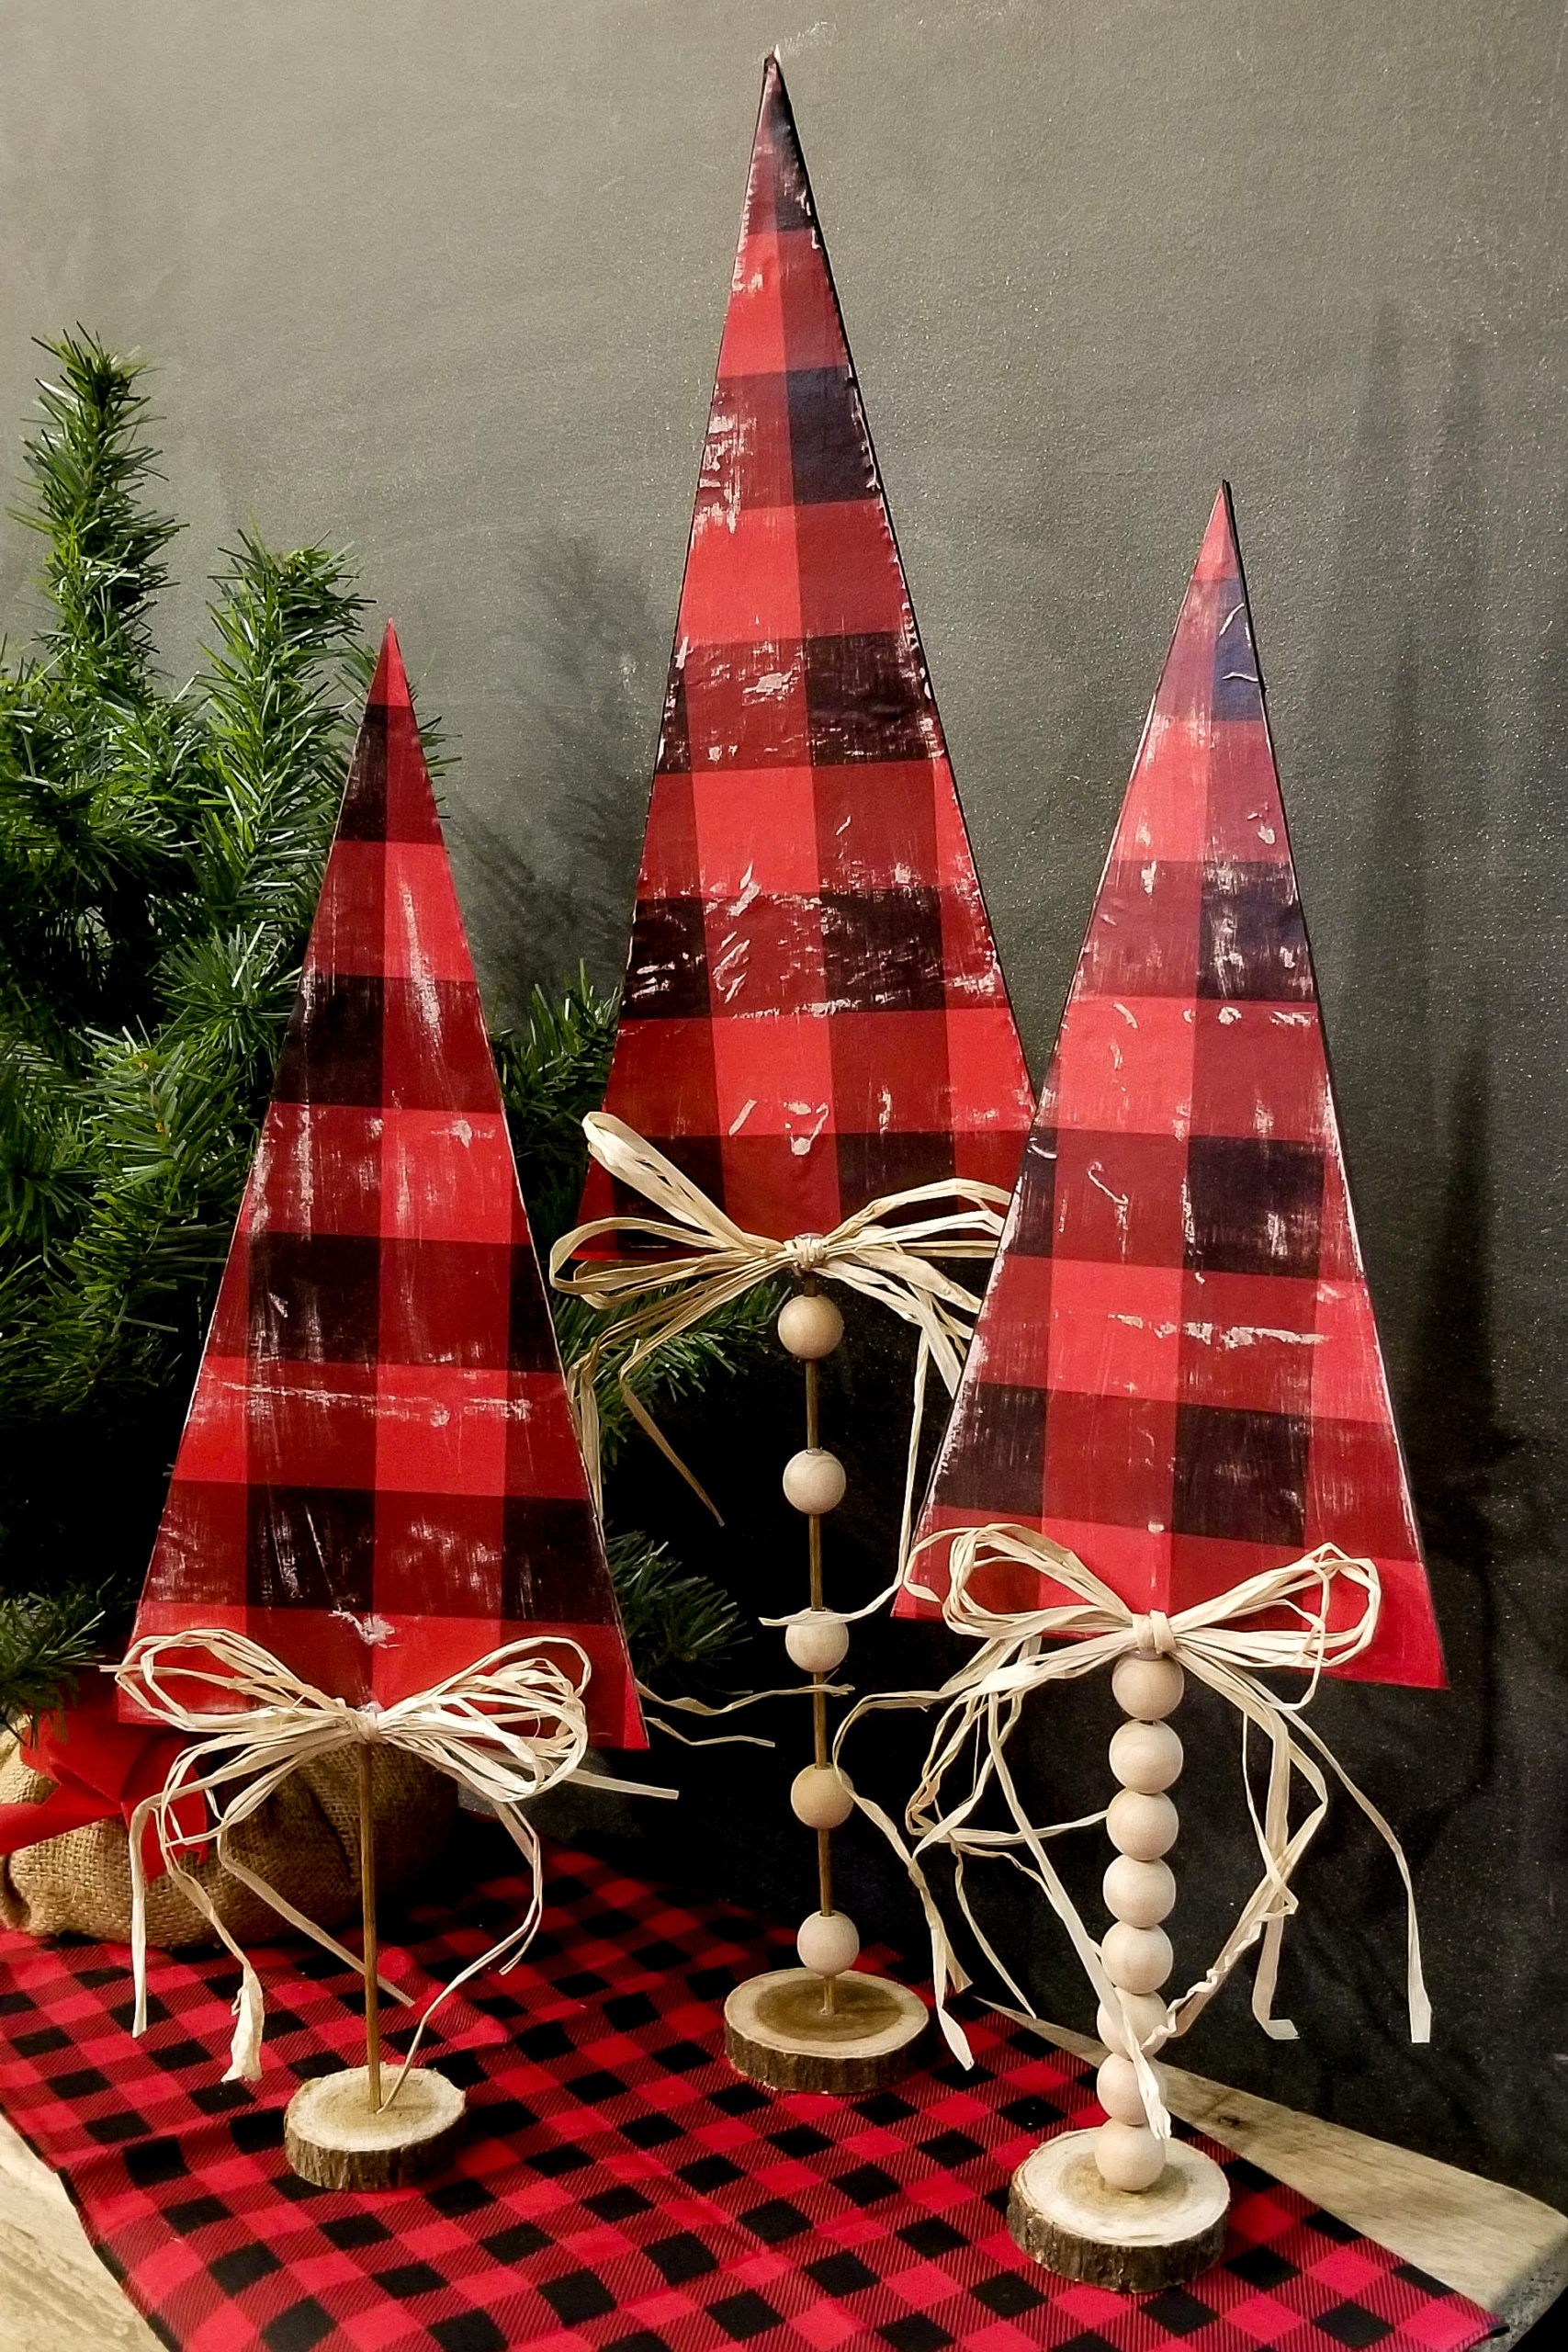 DIY Foam Board Christmas Trees – Sprinkled and Painted at KA Styles.co